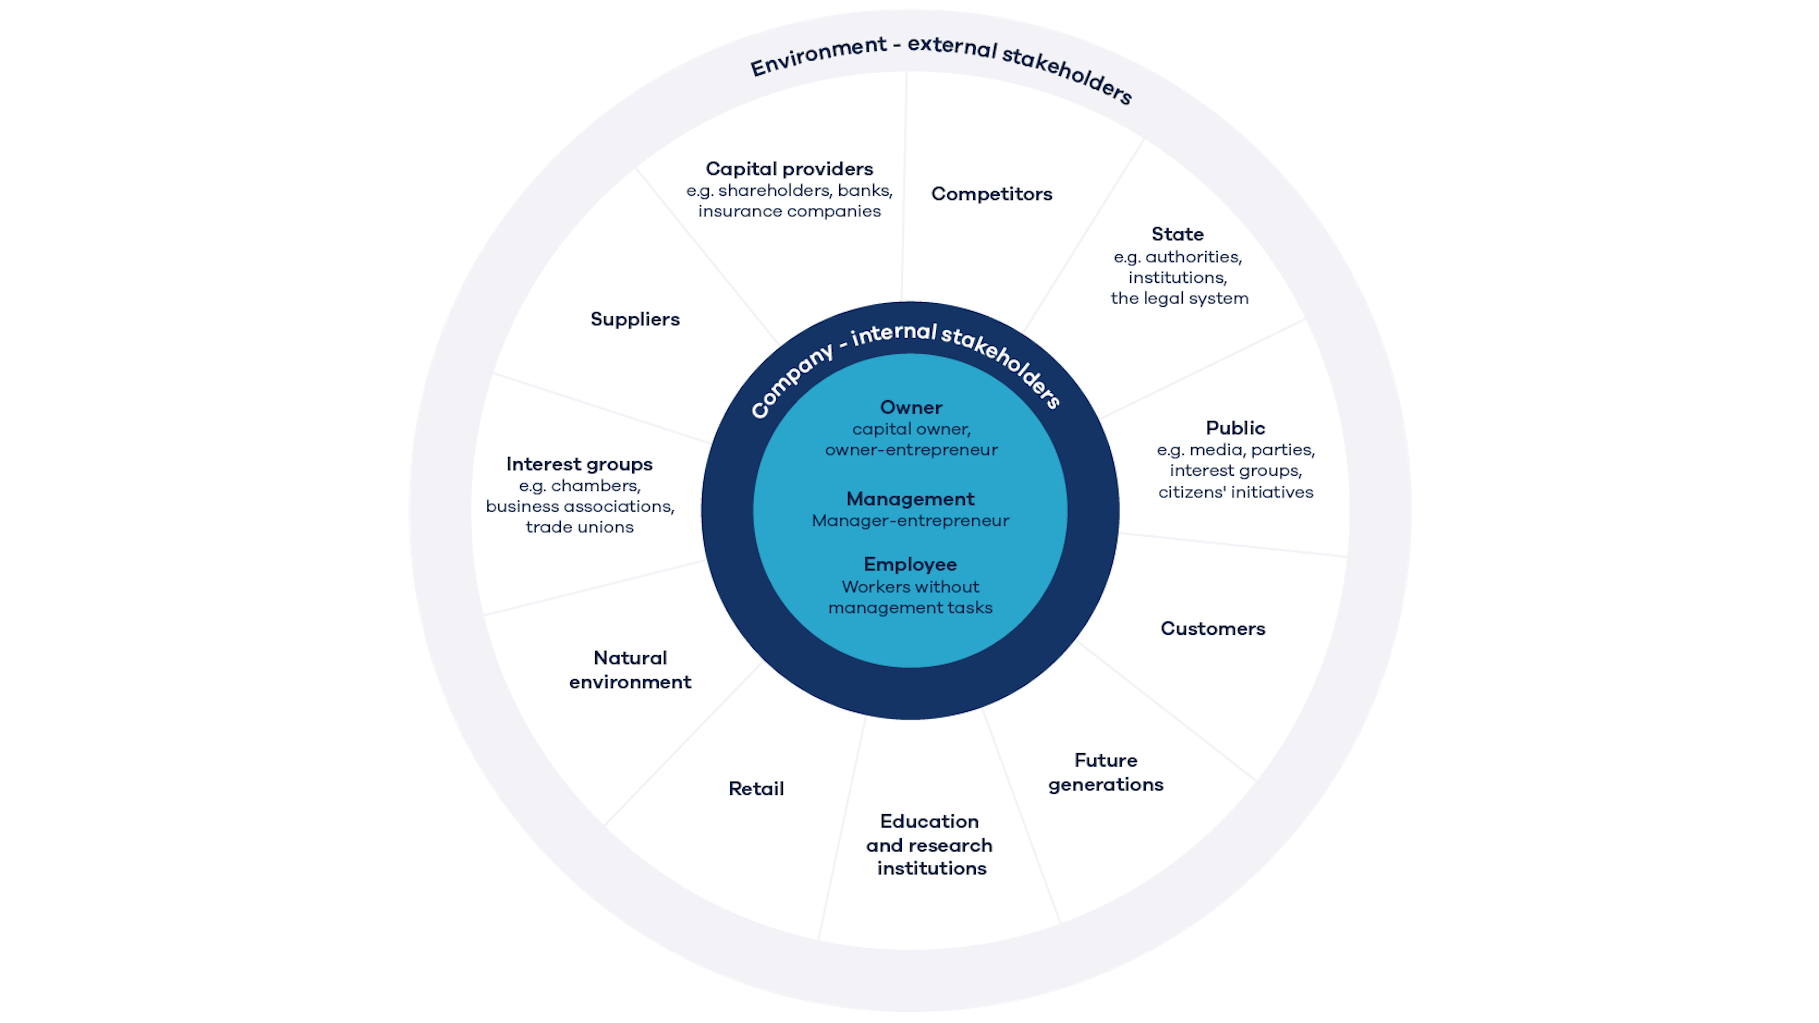 Circular diagram of the corporate environment, divided into the outer circle of external stakeholders and the inner circle of internal stakeholders.